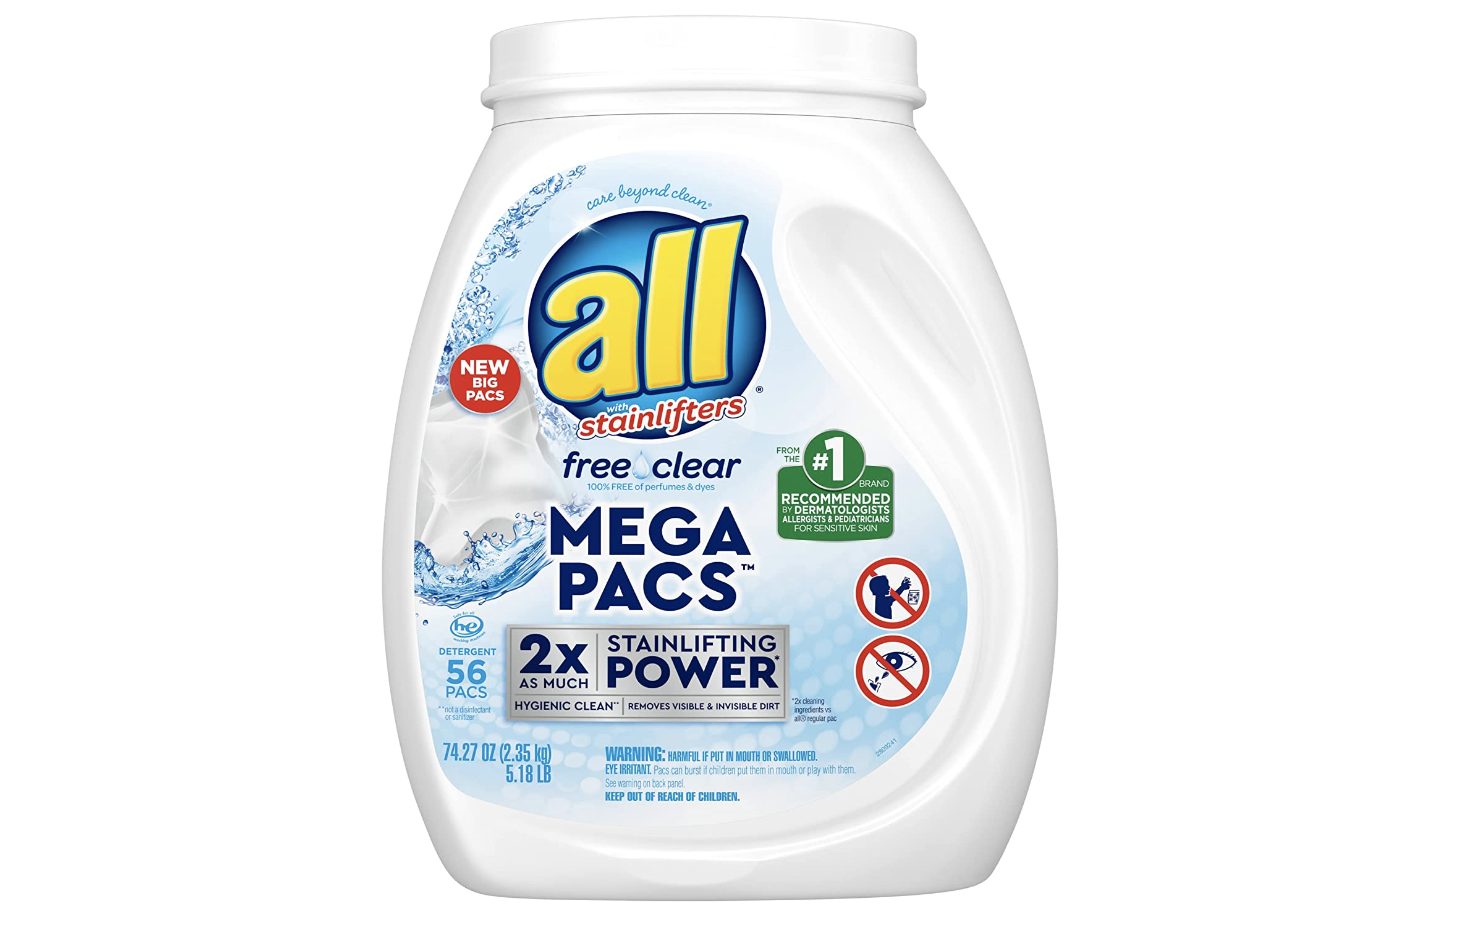 all free and clear laundry detergent pacs, best laundry detergents for kids and families